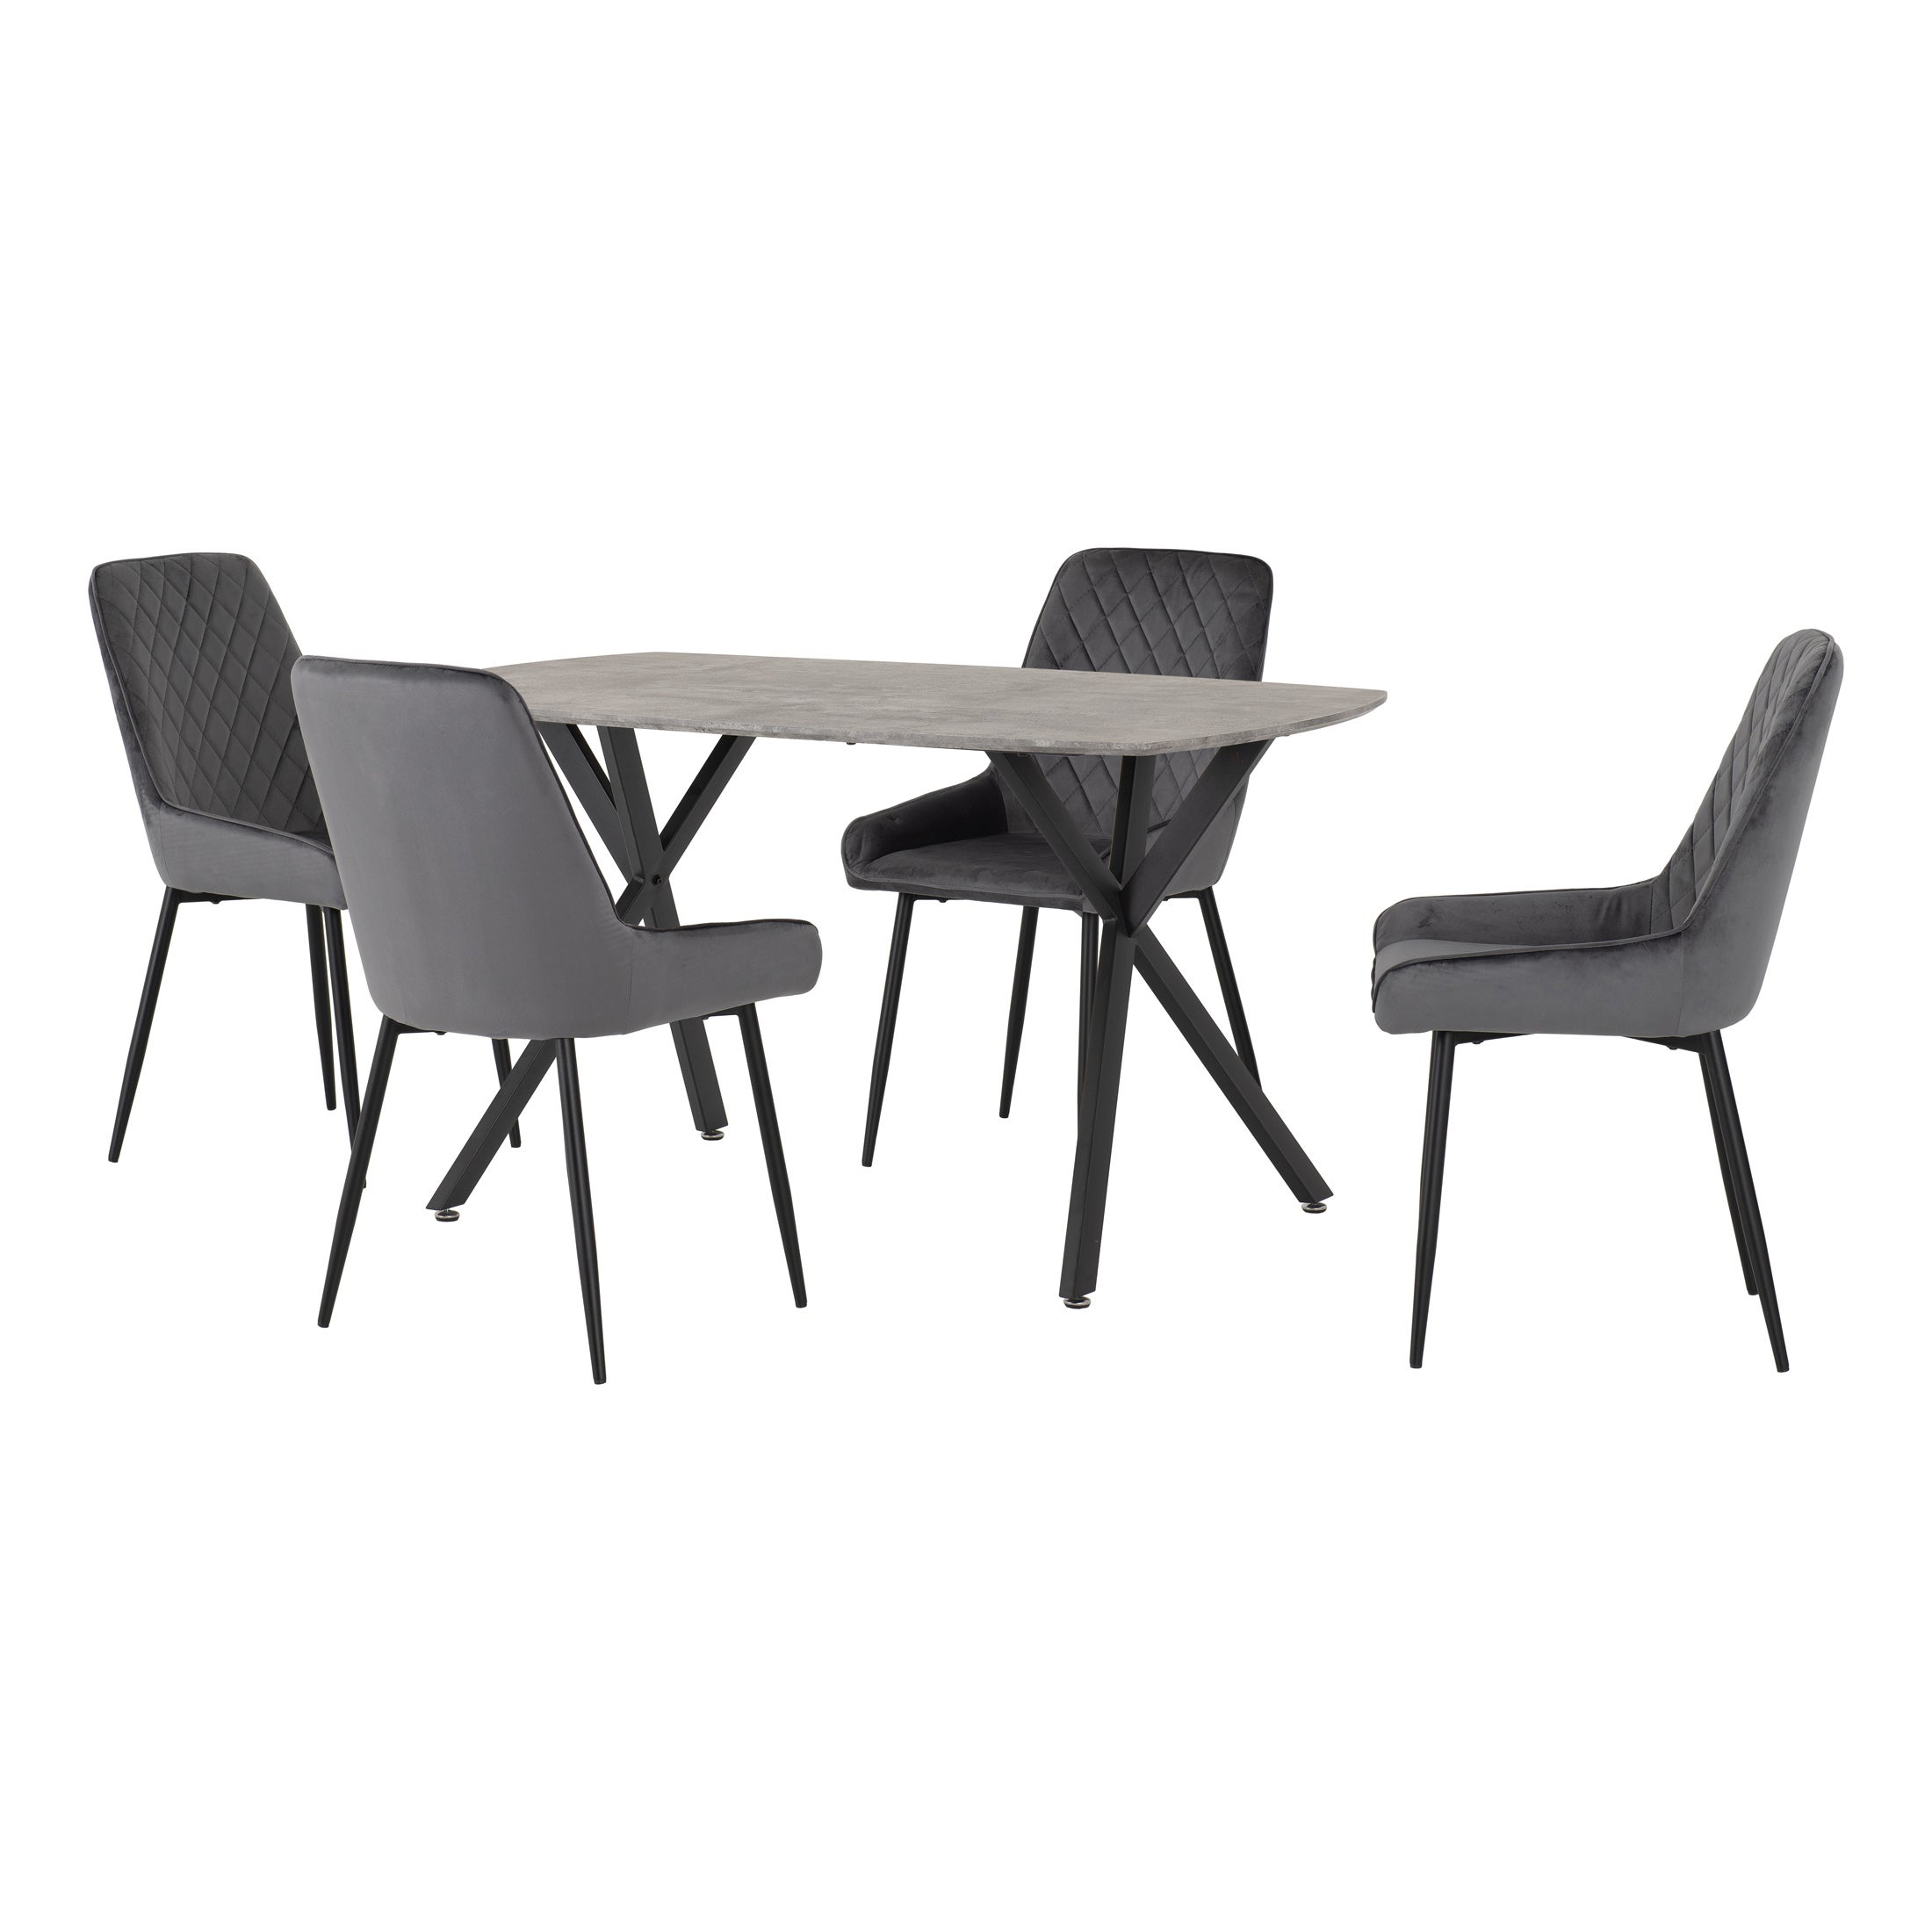 Athens Rectangular Dining Table with 4 Avery Chairs, Concrete Effect Grey